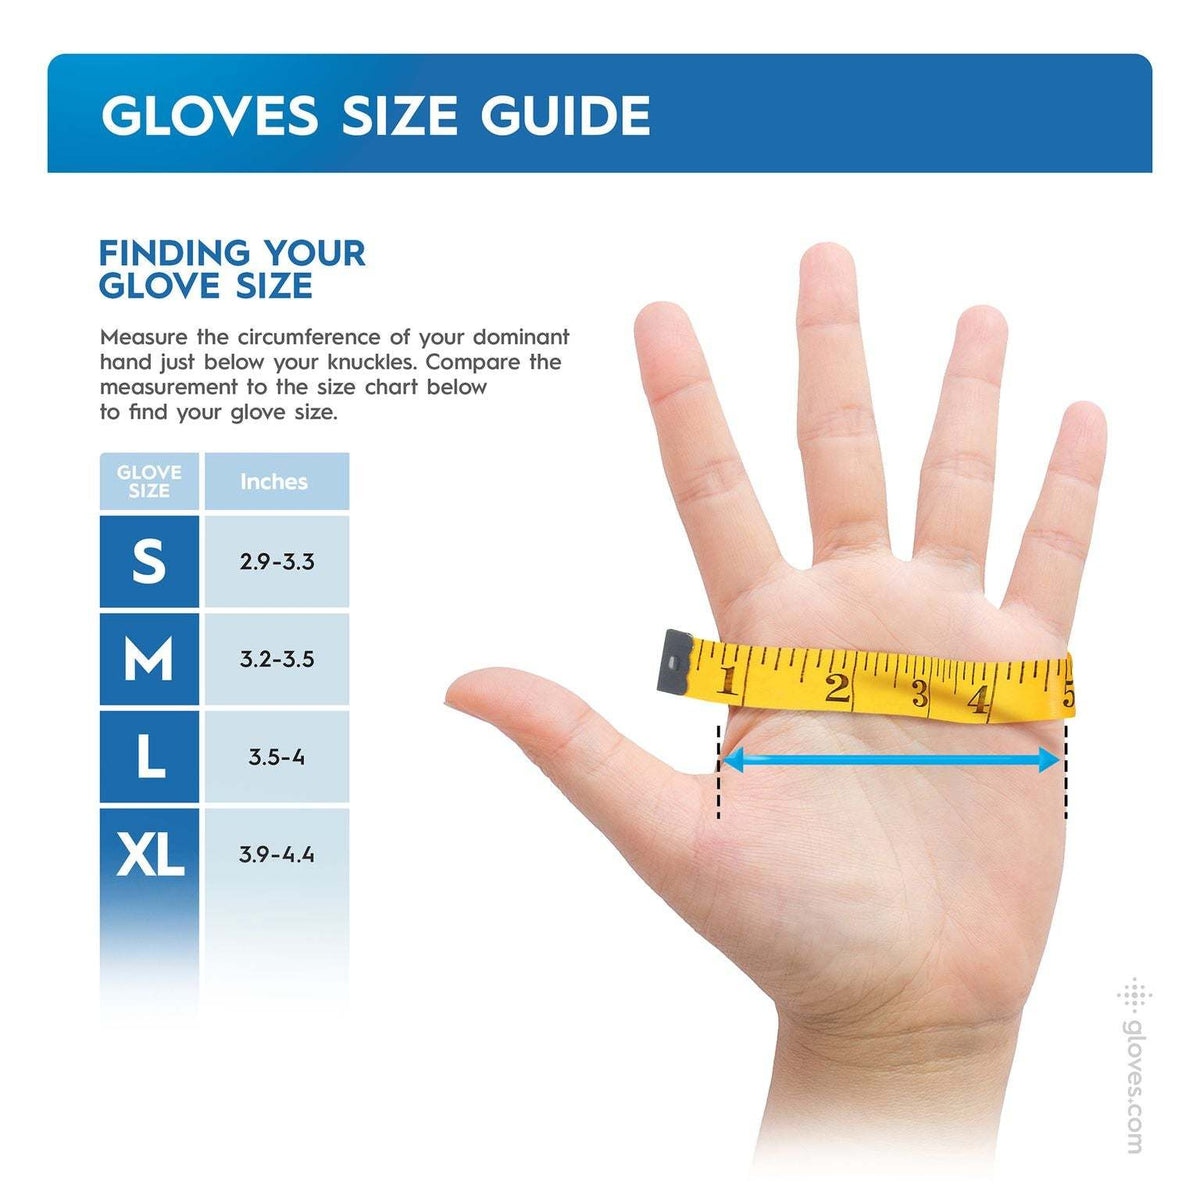 Gloves Size Guide